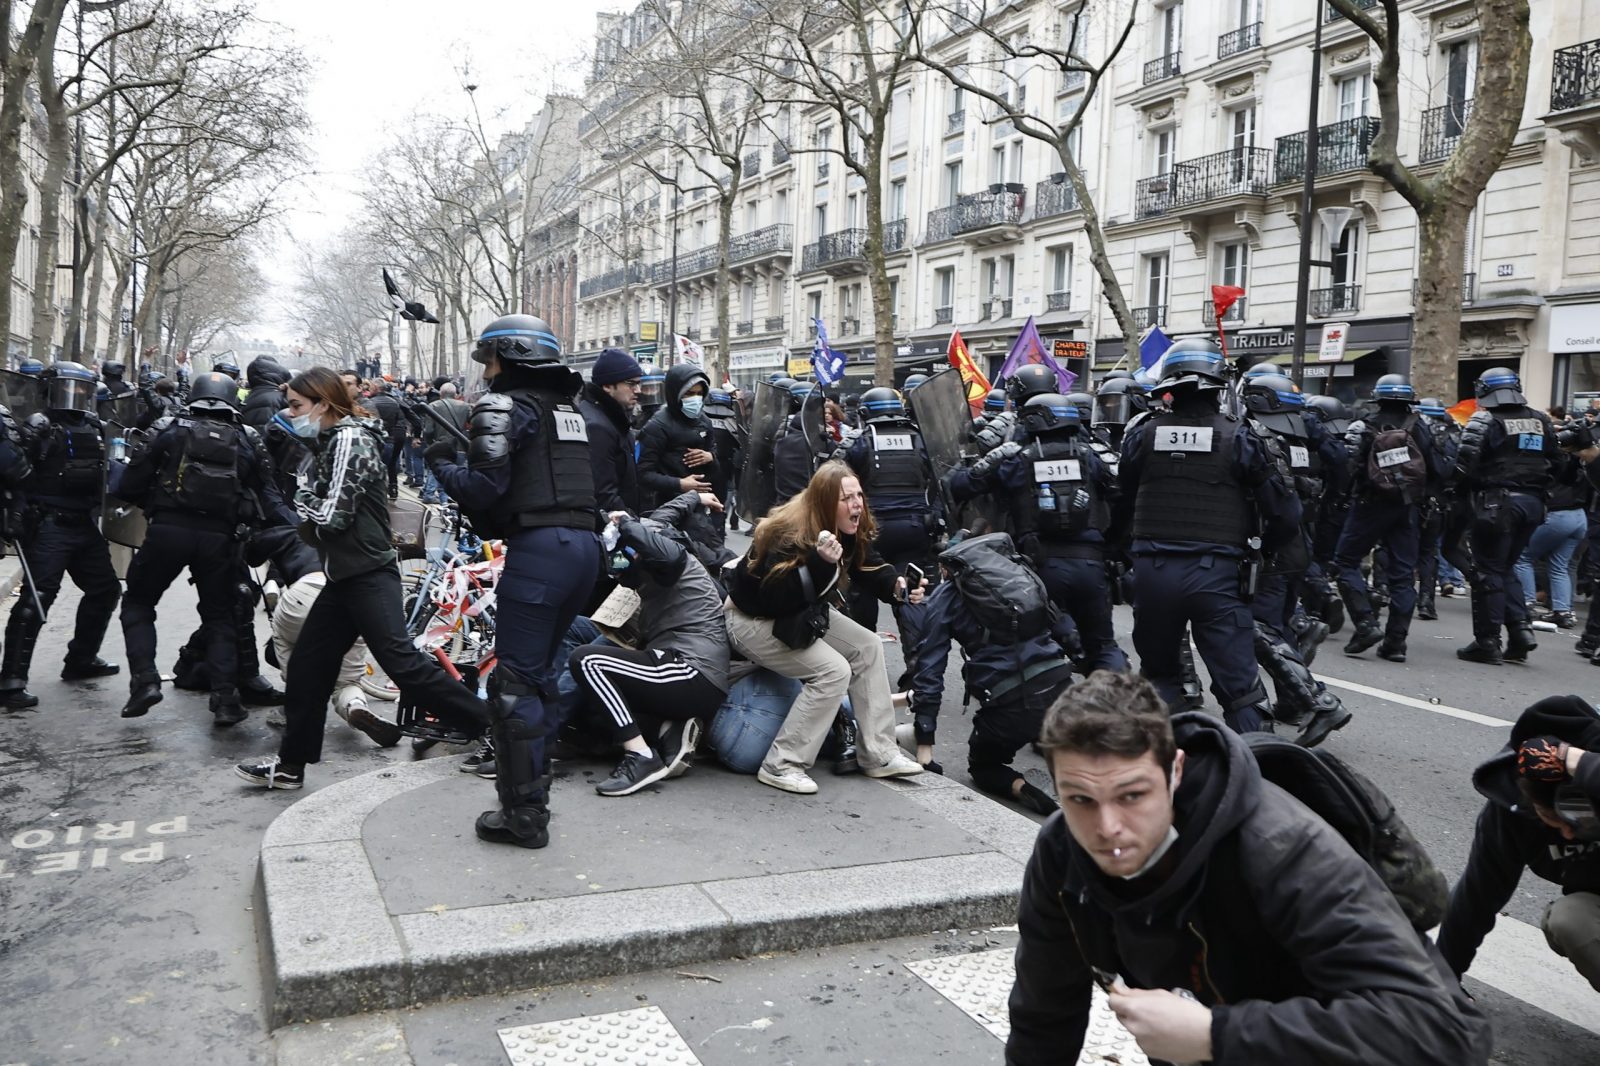 epa10547303 Riot police in clash with protesters during a rally against the government's pension reform in Paris, France, 28 March 2023. France faces an ongoing national strike against the government's pensions reform after tthe French prime minister announced on 16 March 2023 the use of Article 49 paragraph 3 (49.3) of the French Constitution to have the text on the controversial pension reform law - raising retirement age from 62 to 64 - be definitively adopted without a vote.  EPA/CHRISTOPHE PETIT TESSON